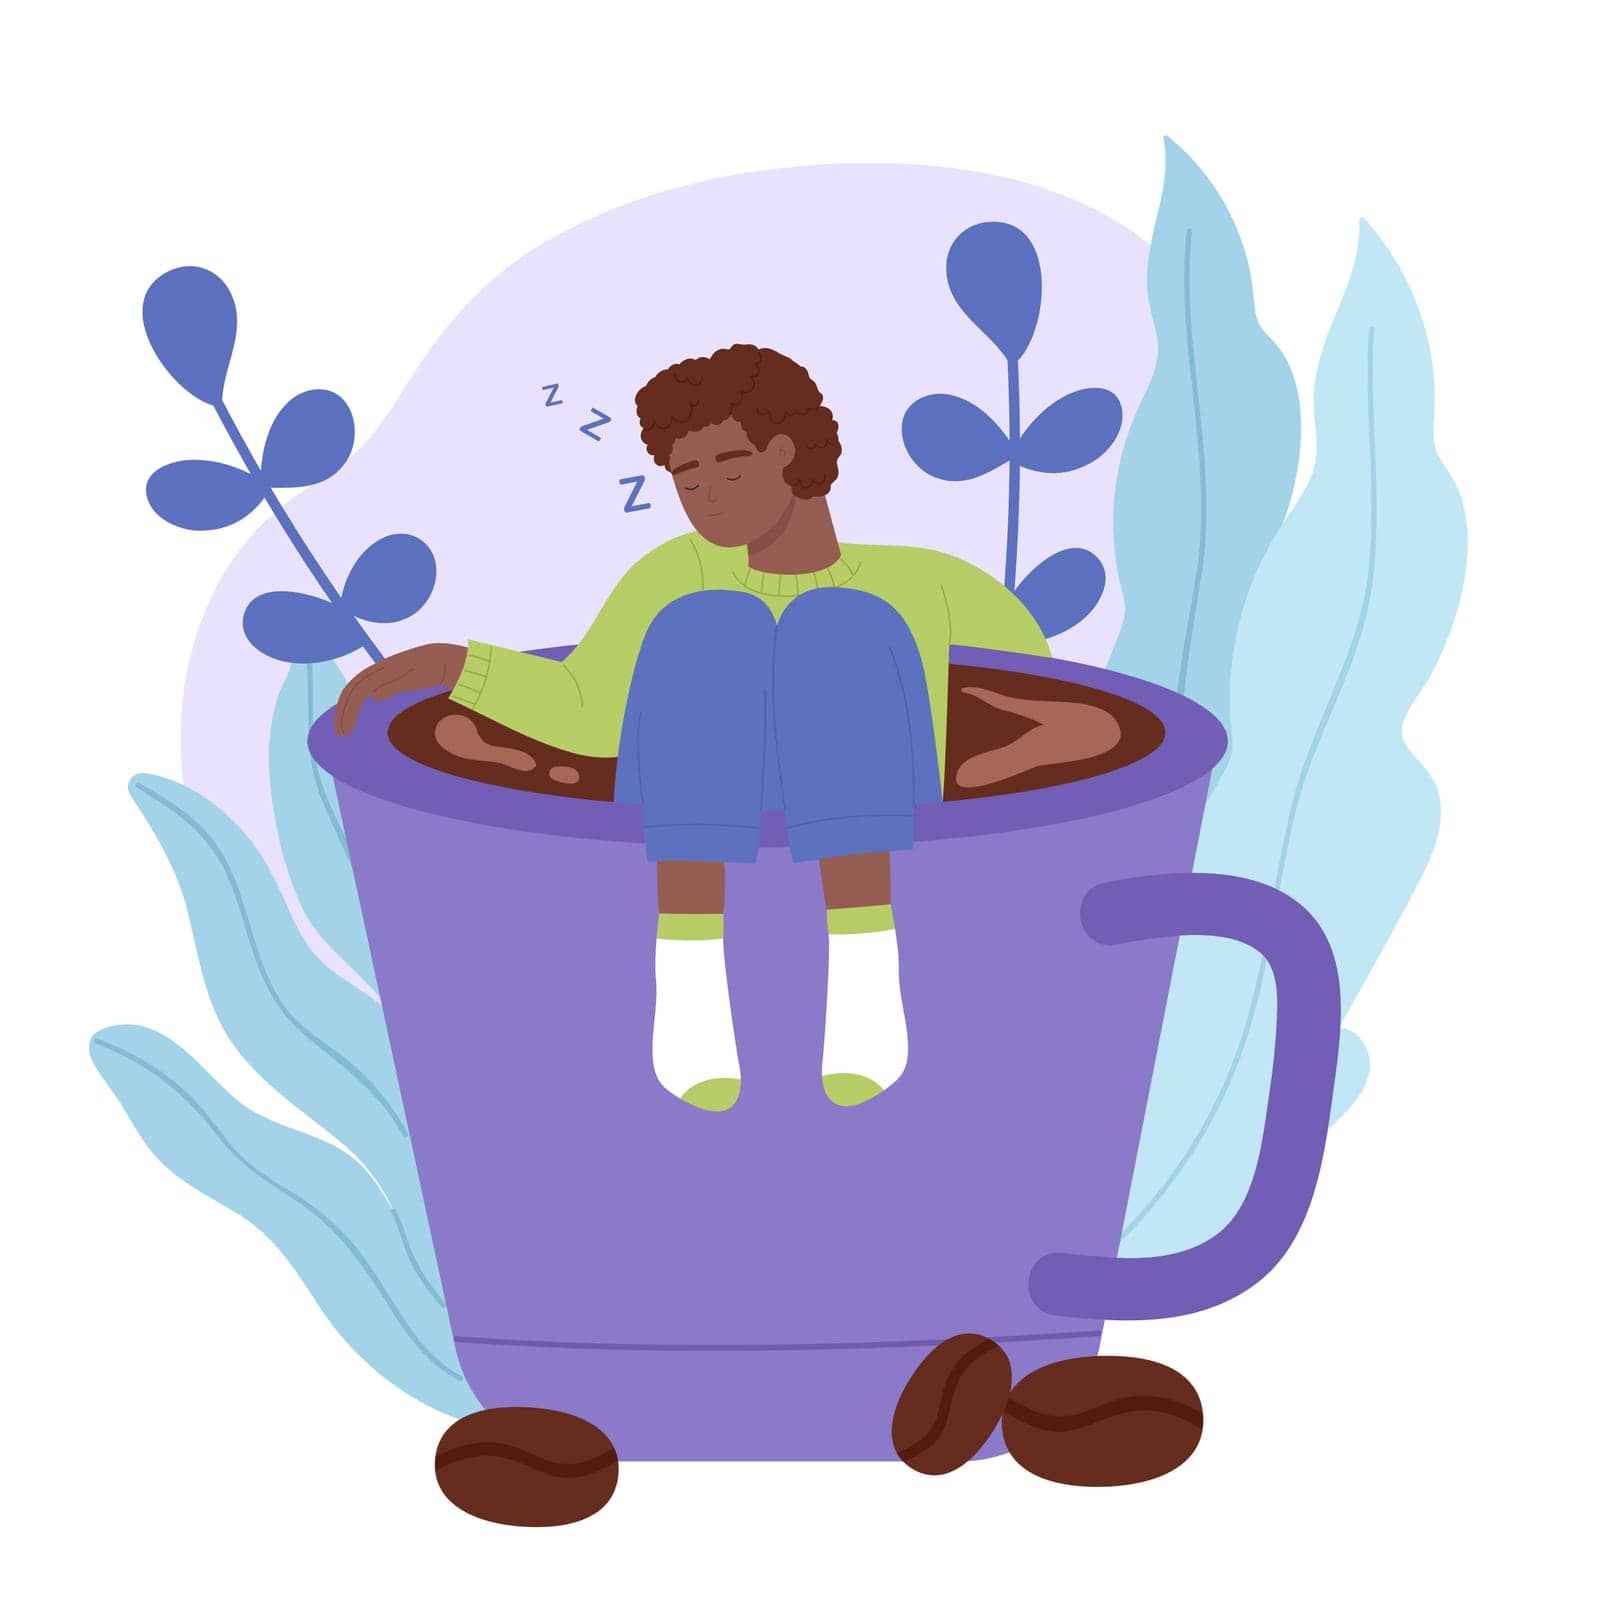 Morning coffee cups with sleepy tired man vector illustration. Cartoon isolated big mugs with lazy and exhausted male tiny character without energy in need rest and sleep